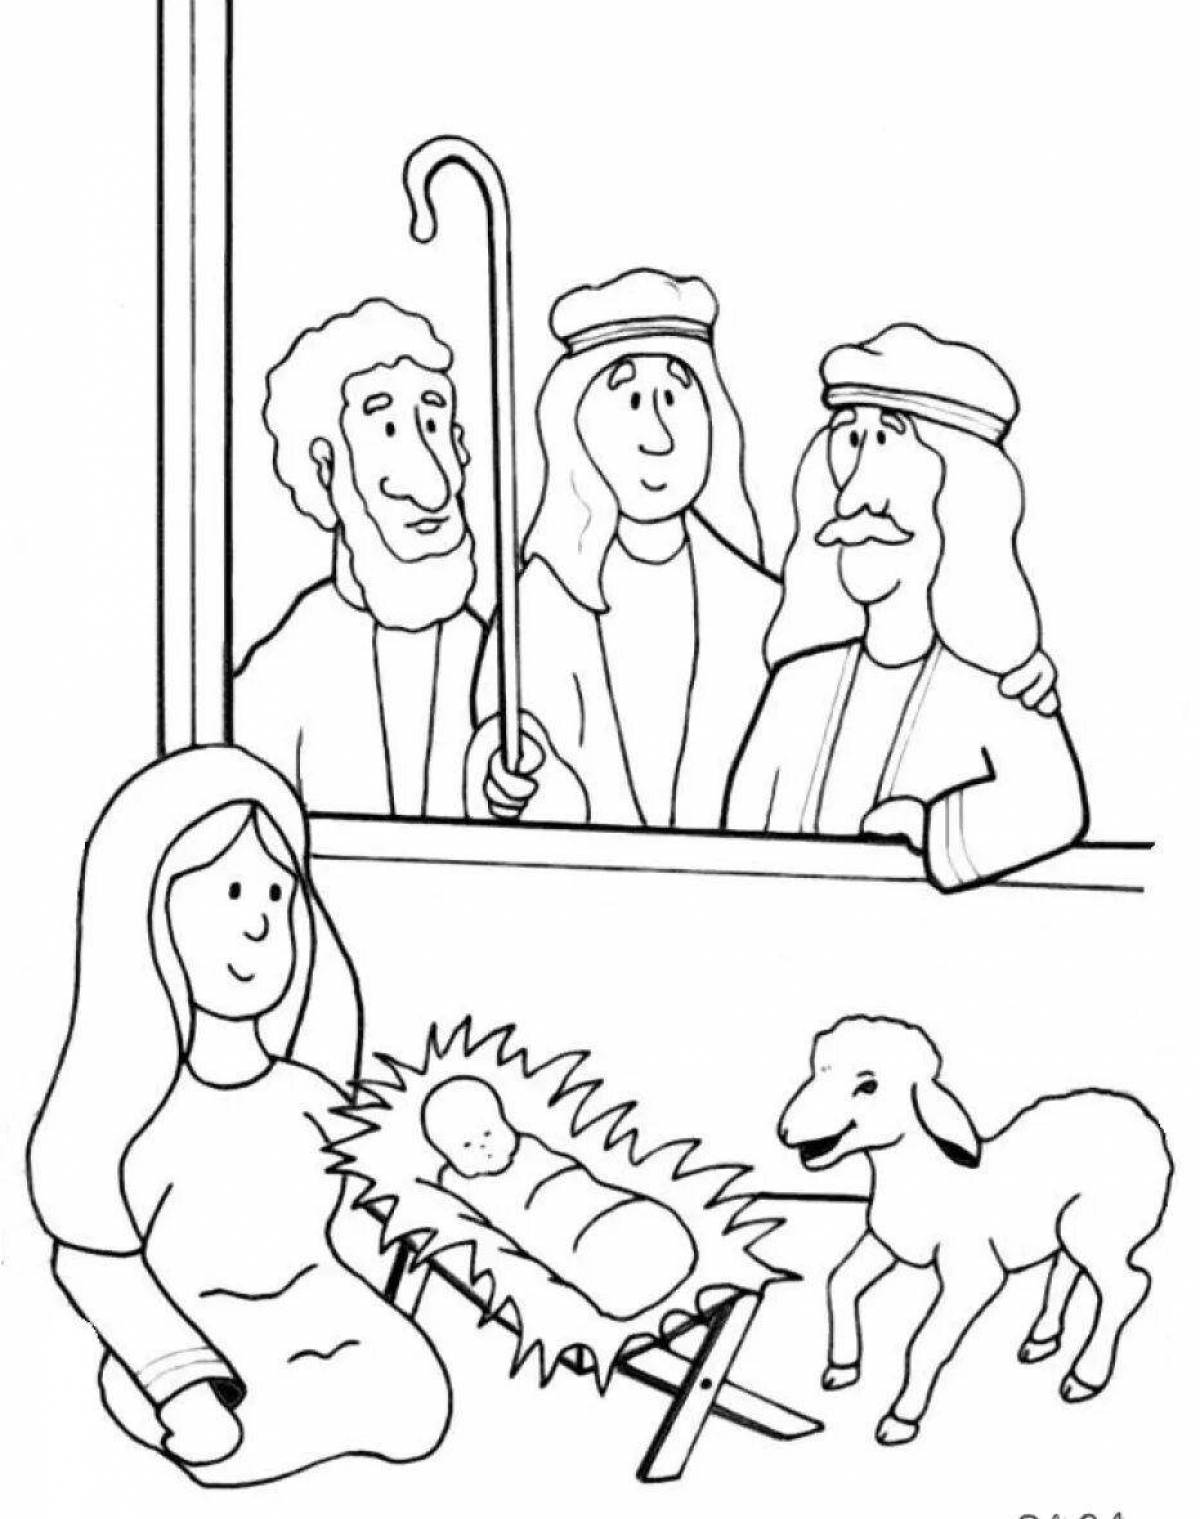 Coloring page exalted birth of christ